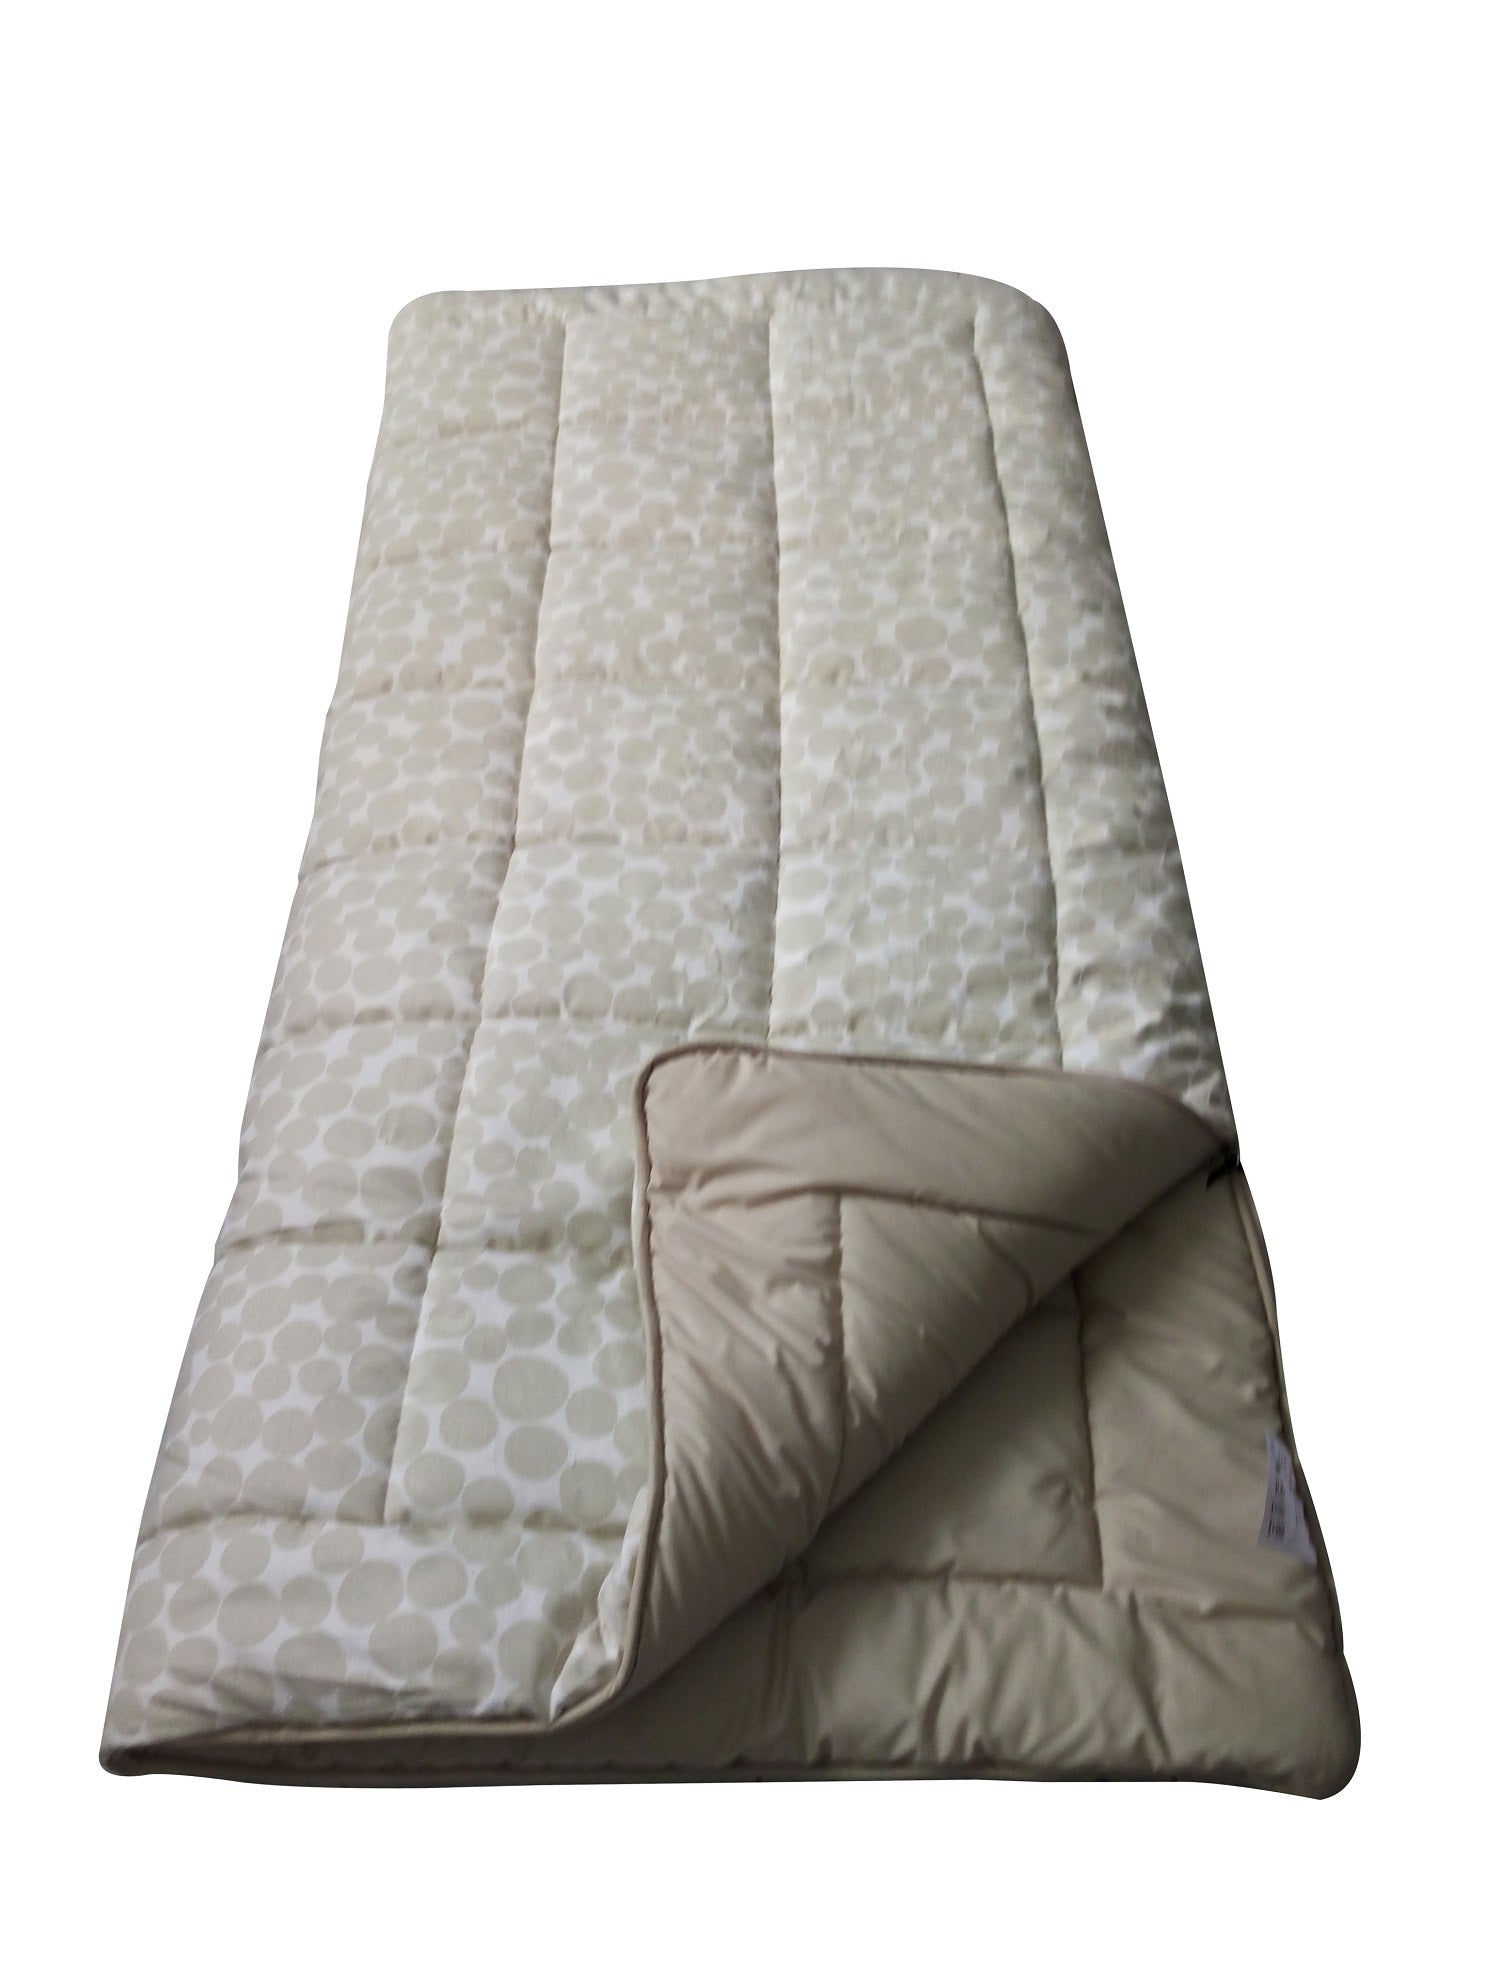 Orb - Super Deluxe King Size Sleeping Bag